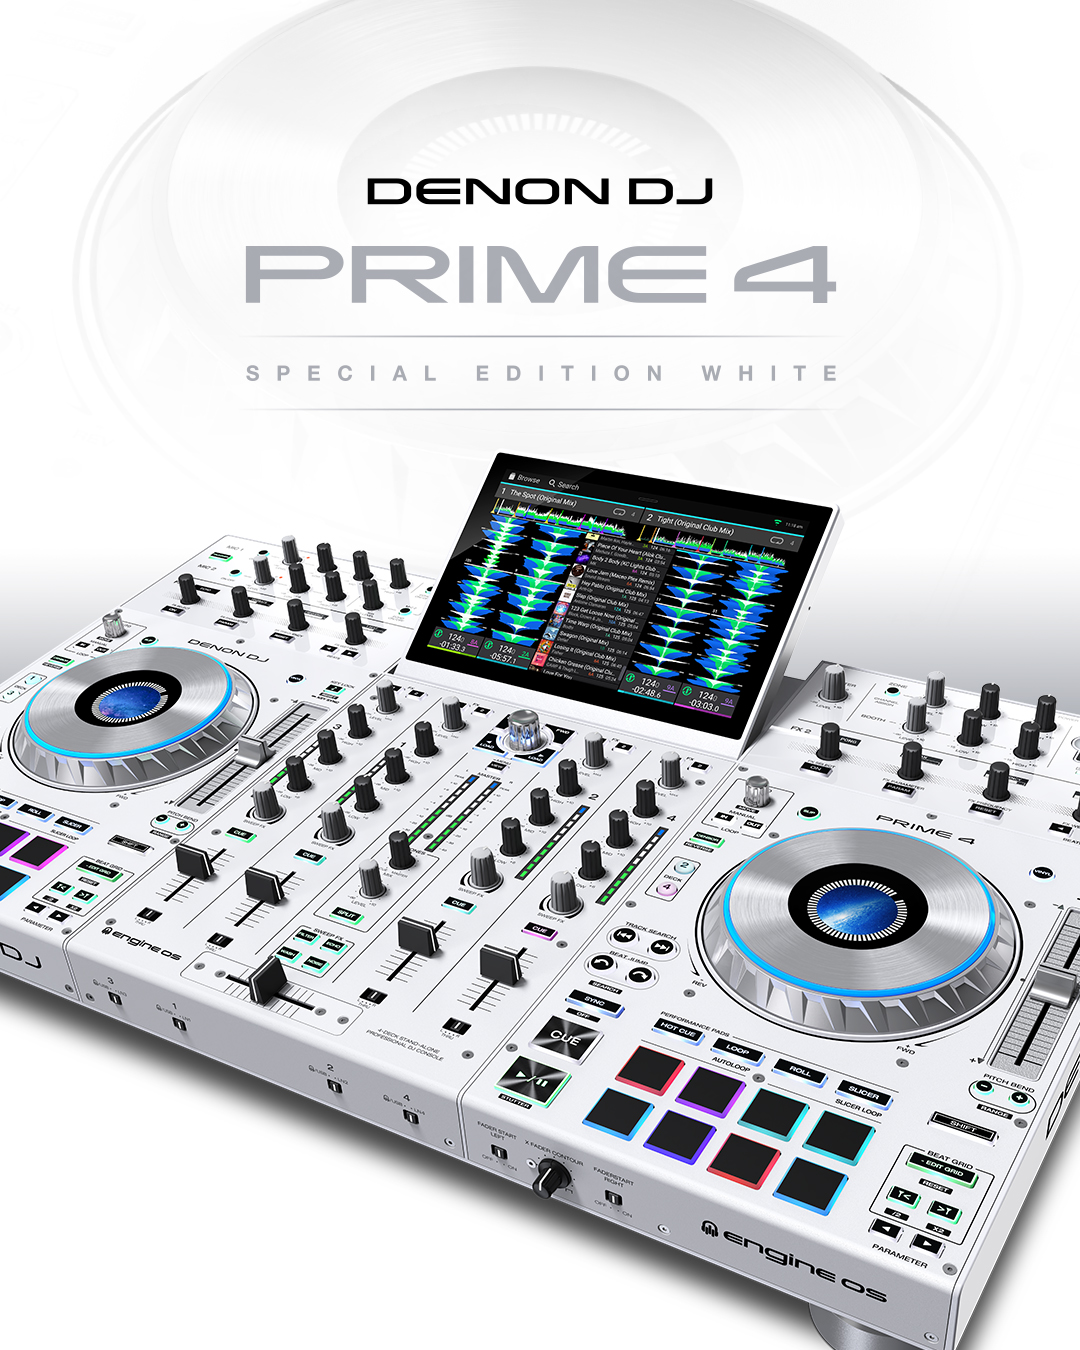 Denon DJ on Twitter: "We're pleased to announce the PRIME 4 is now  available in Special Edition White. Featuring the same innovative features,  and powered by the Engine DJ platform, the Special